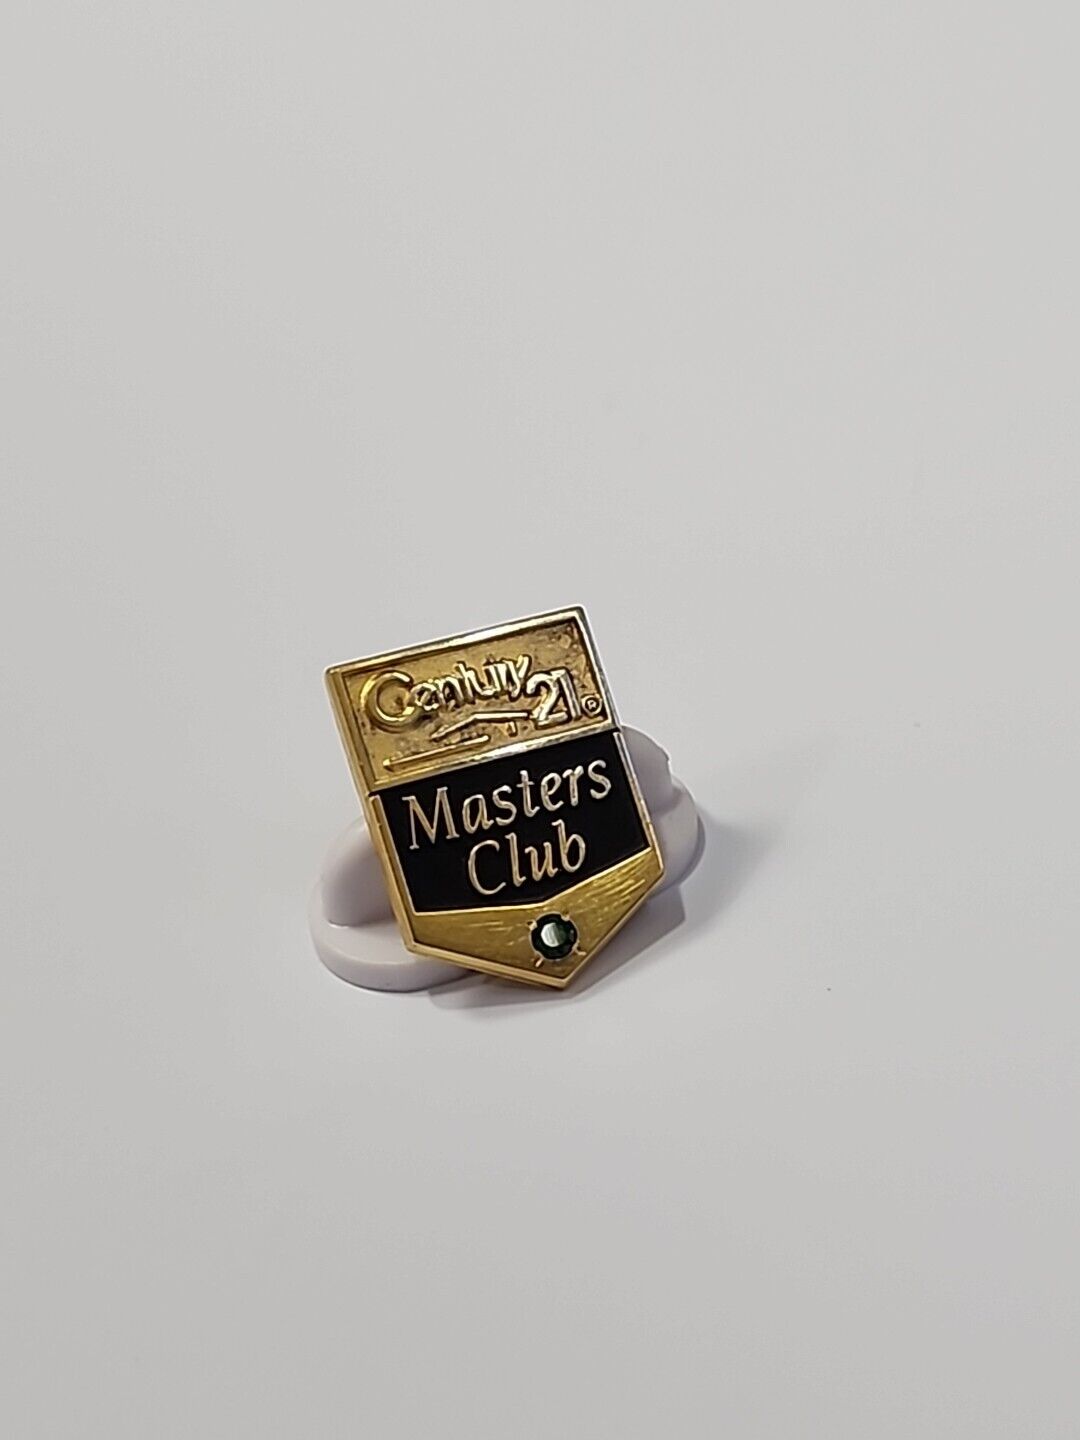 Century 21 Masters Club Award Tie Tack Pin Terryberry Sterling Green Gem